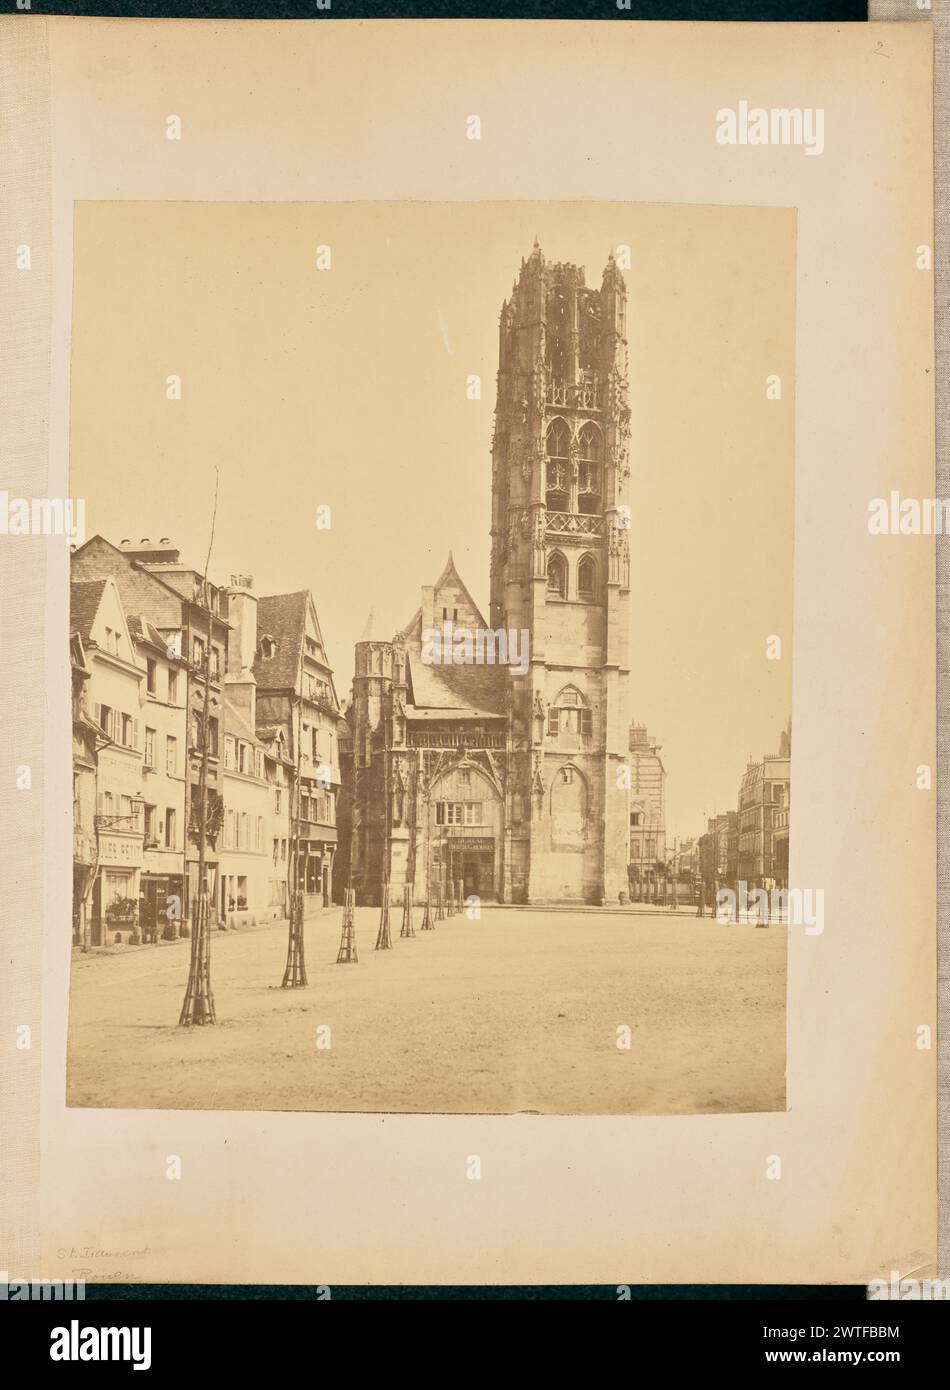 St. Laurent, Rouen. William J. Stillman, photographer (American, 1828 - 1901) about 1861 View of the Église Saint-Laurent in Rouen, currently the Musée le Secq des Tournelles, from across a square in front. The square is lines with shops and houses on one side, and two perfectly straight rows of saplings supported by cages aroung their trunks cut through the square. (Recto, mount) upper right, handwritten in pencil: '2'; Lower left, handwritten in pencil: 'St. Laurent / Rouen' Stock Photo